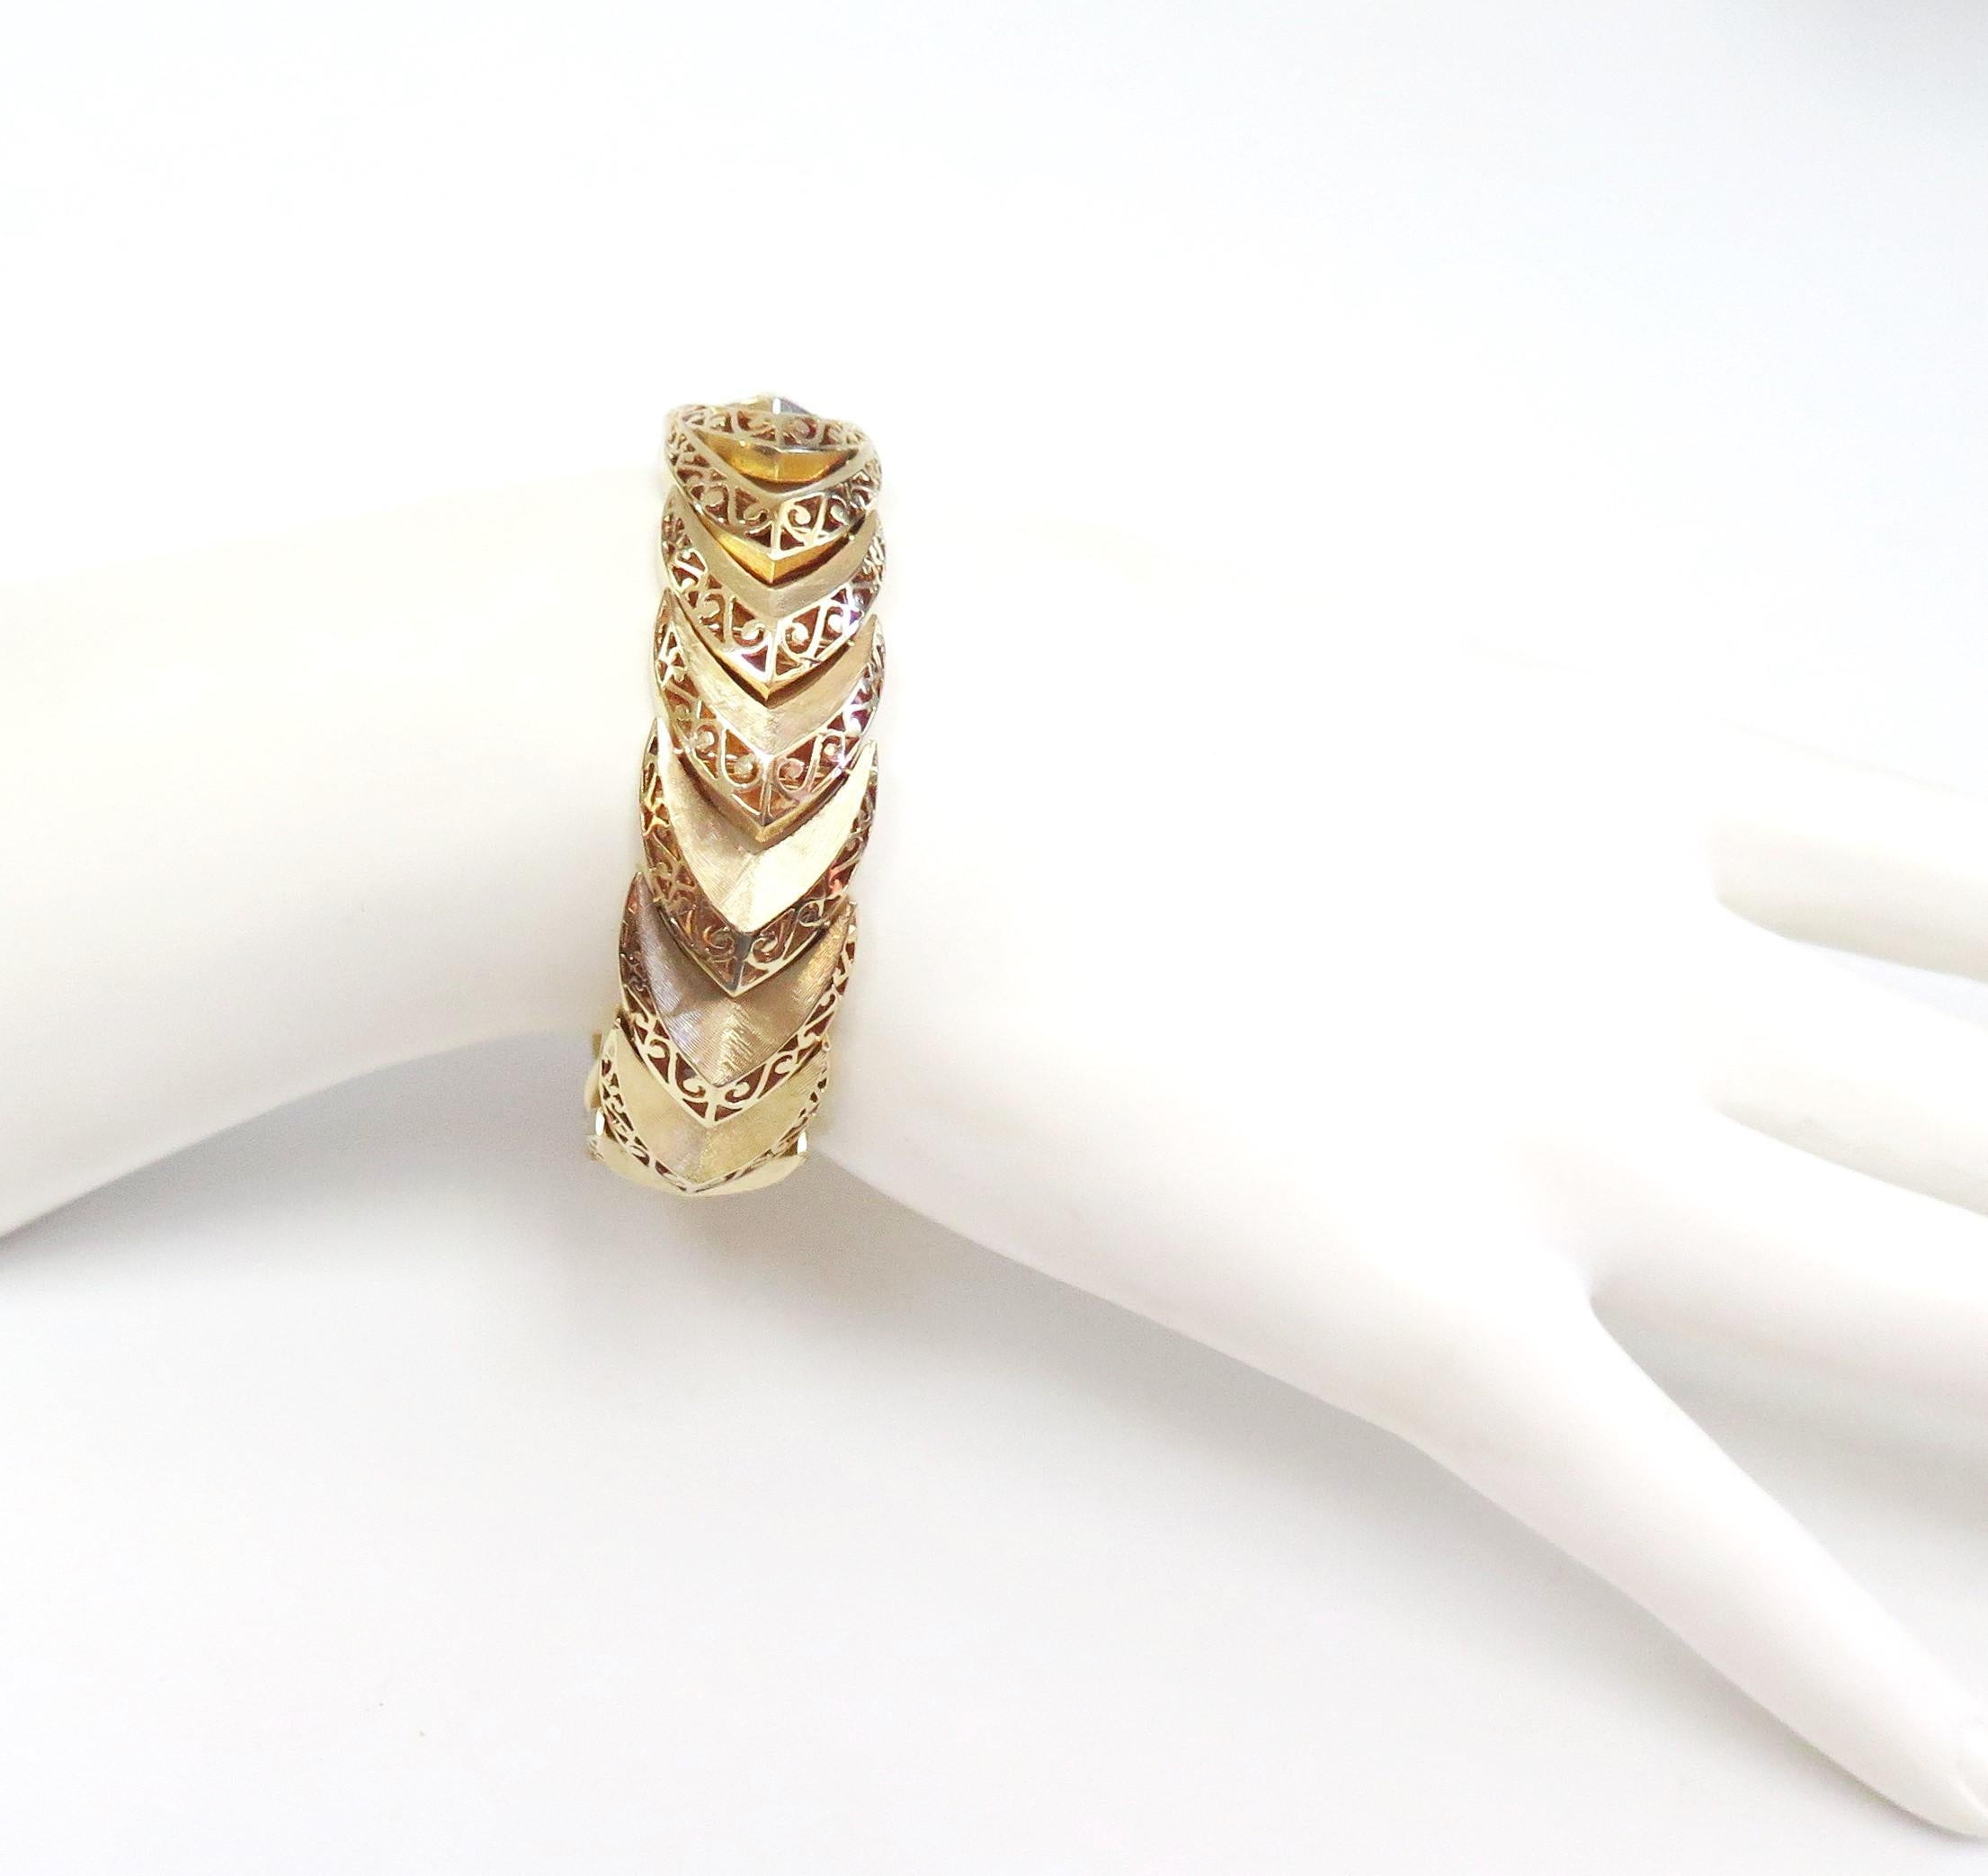 Wide Bracelet with Chevron and Scroll Design, 14 Karat Yellow Gold 4